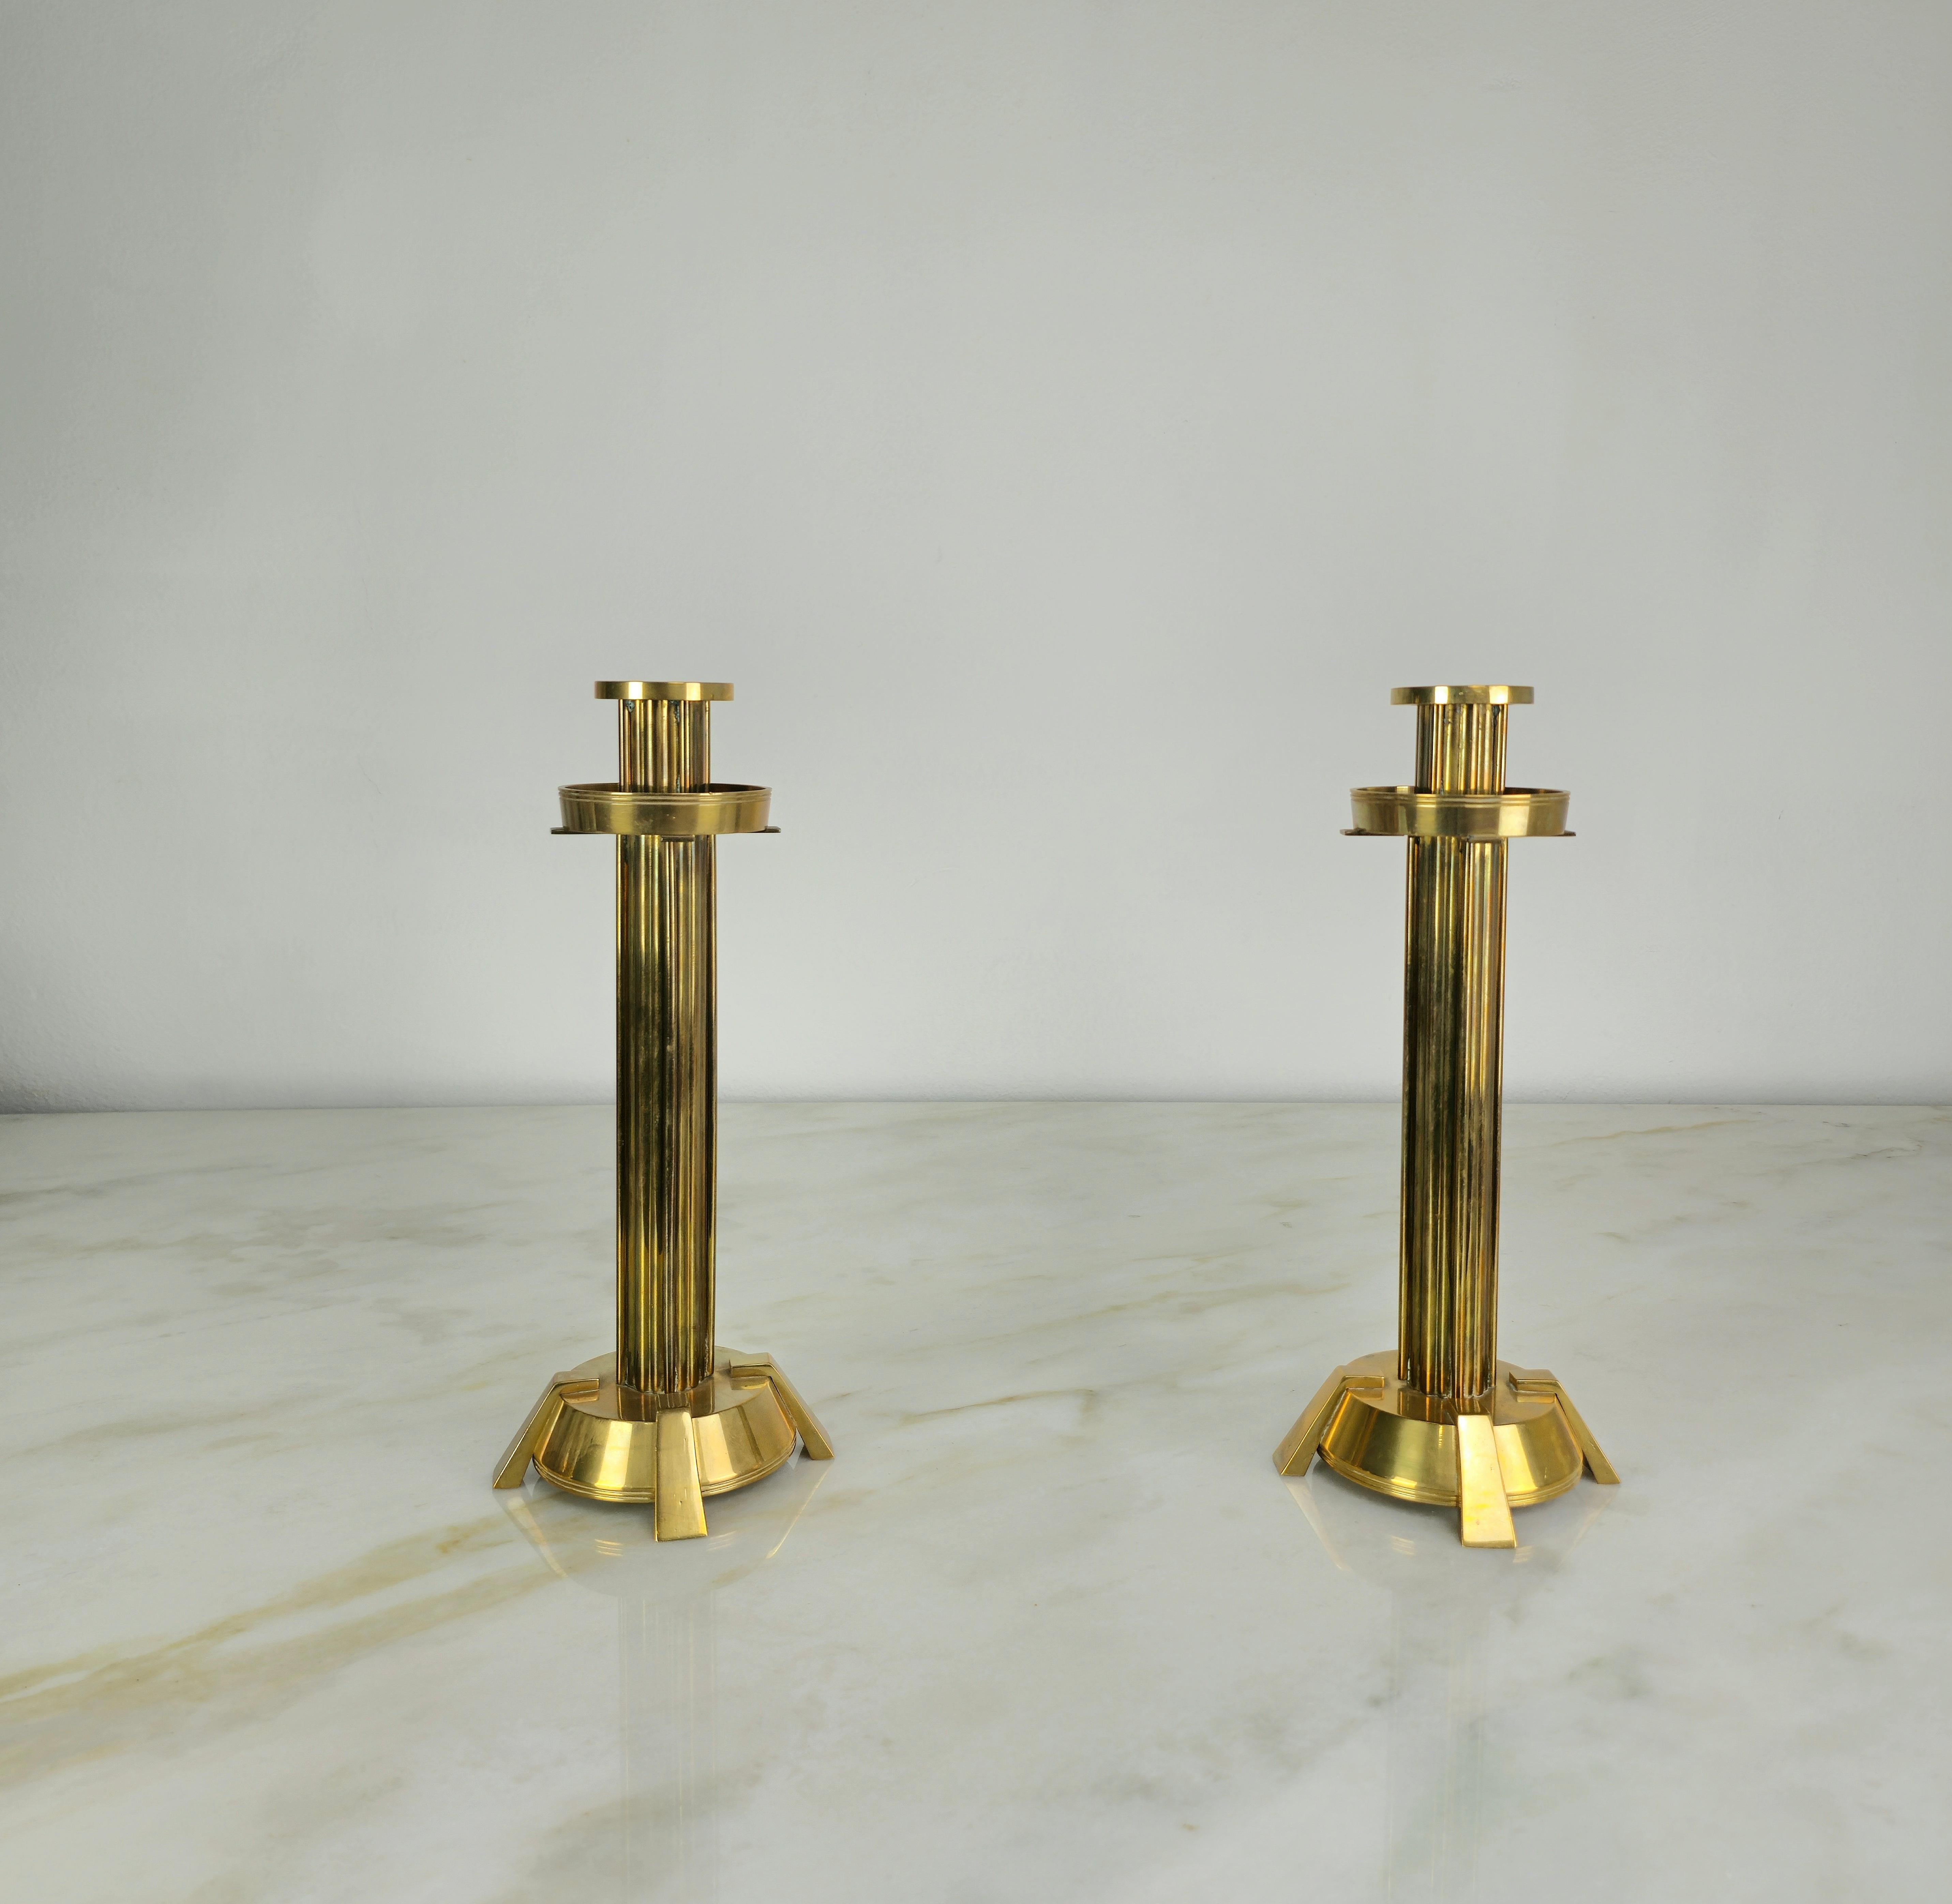 Decorative Object Brass Candelabras Candle Holders Midcentury Italy 70s Set of 4 In Good Condition For Sale In Palermo, IT